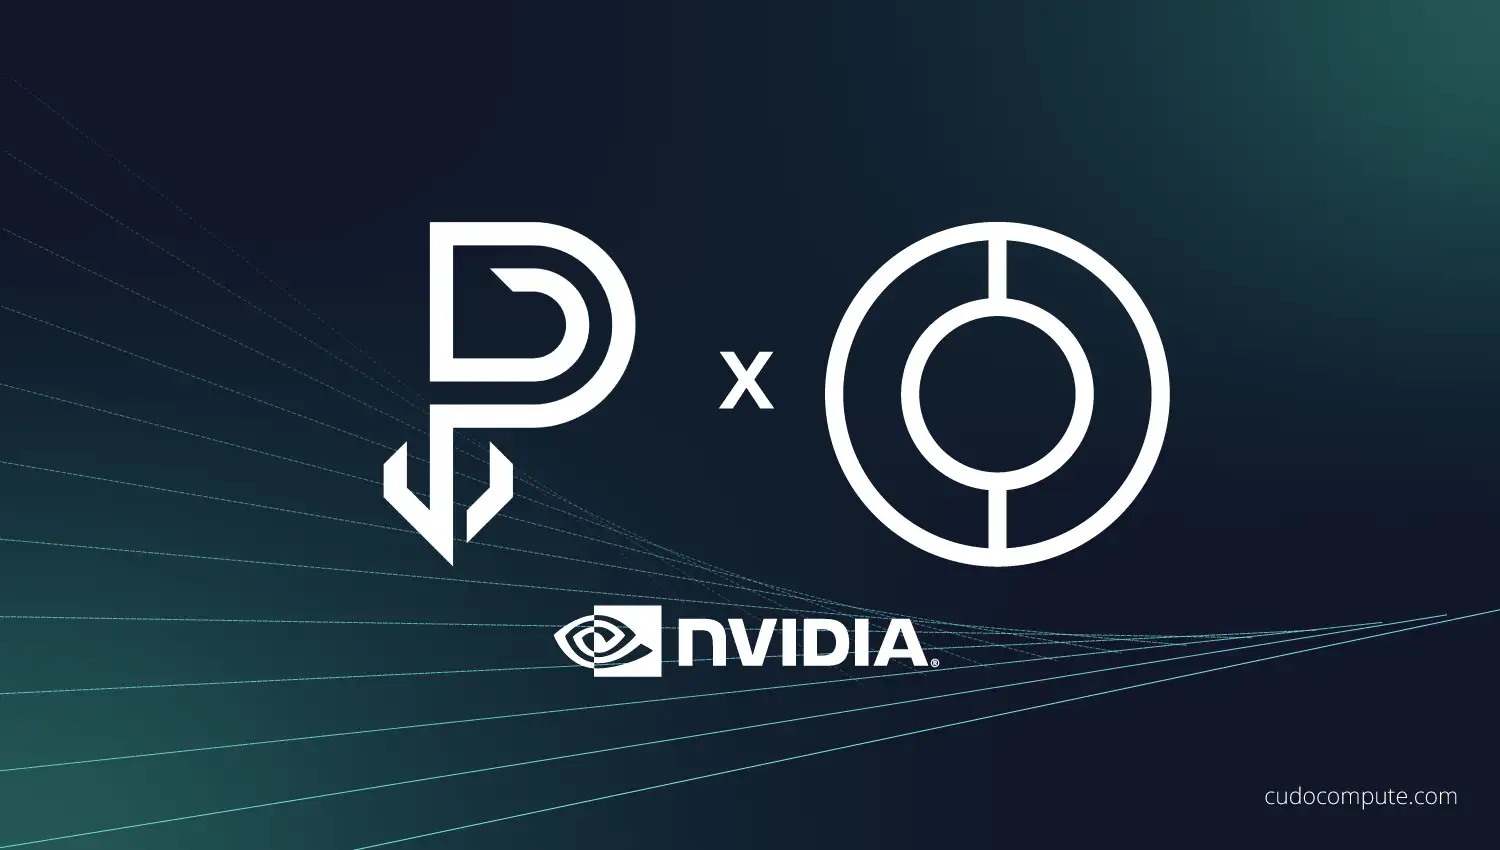 Panchaea works with NVIDIA to power 3D internet’s future via Cudo Compute cover photo